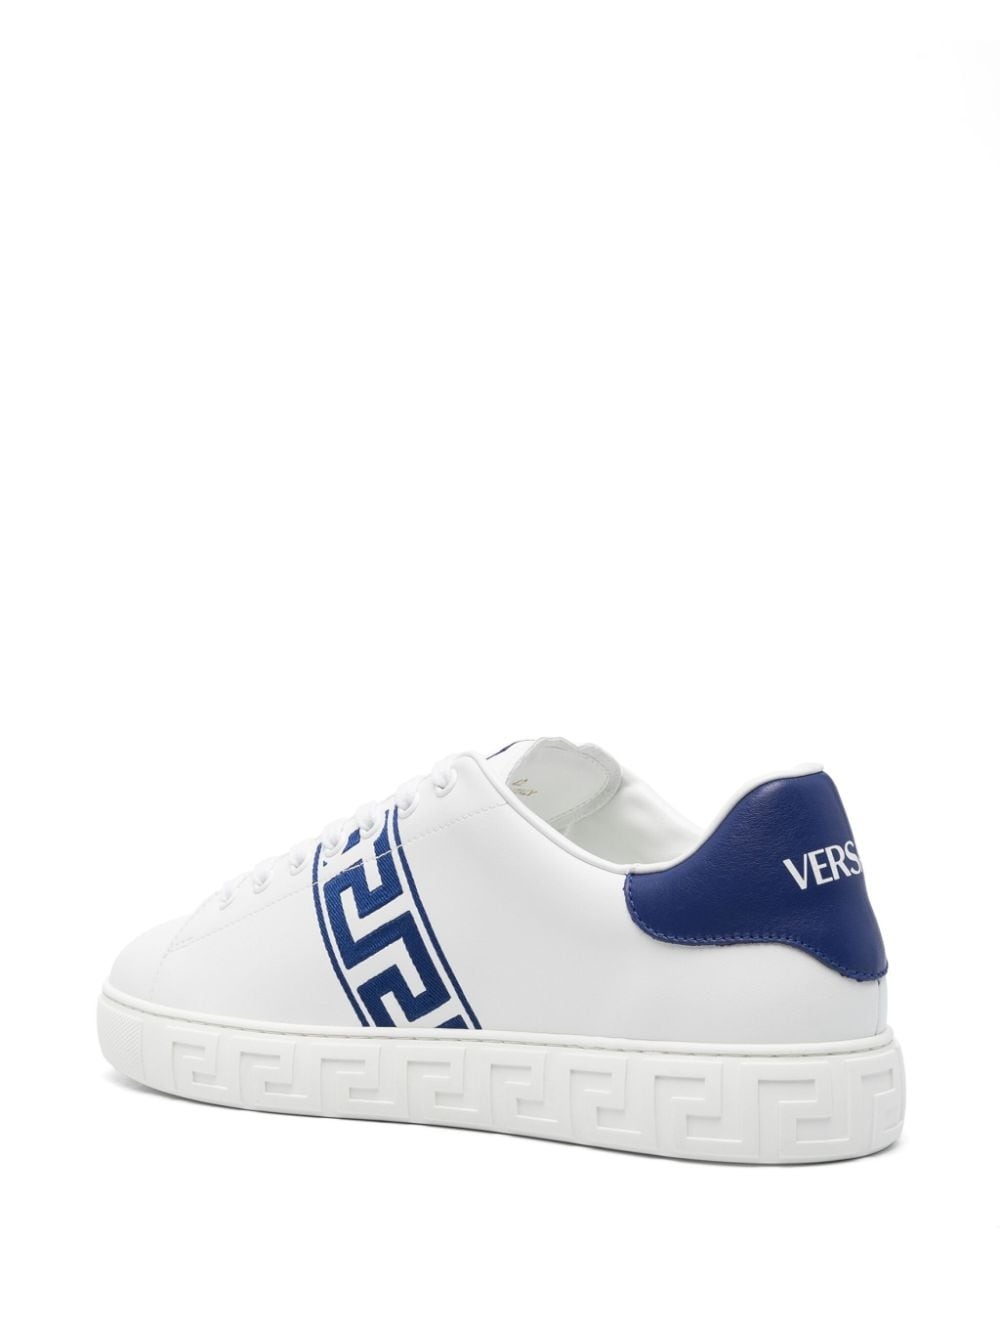 Greca-embroidery leather sneakers - 3